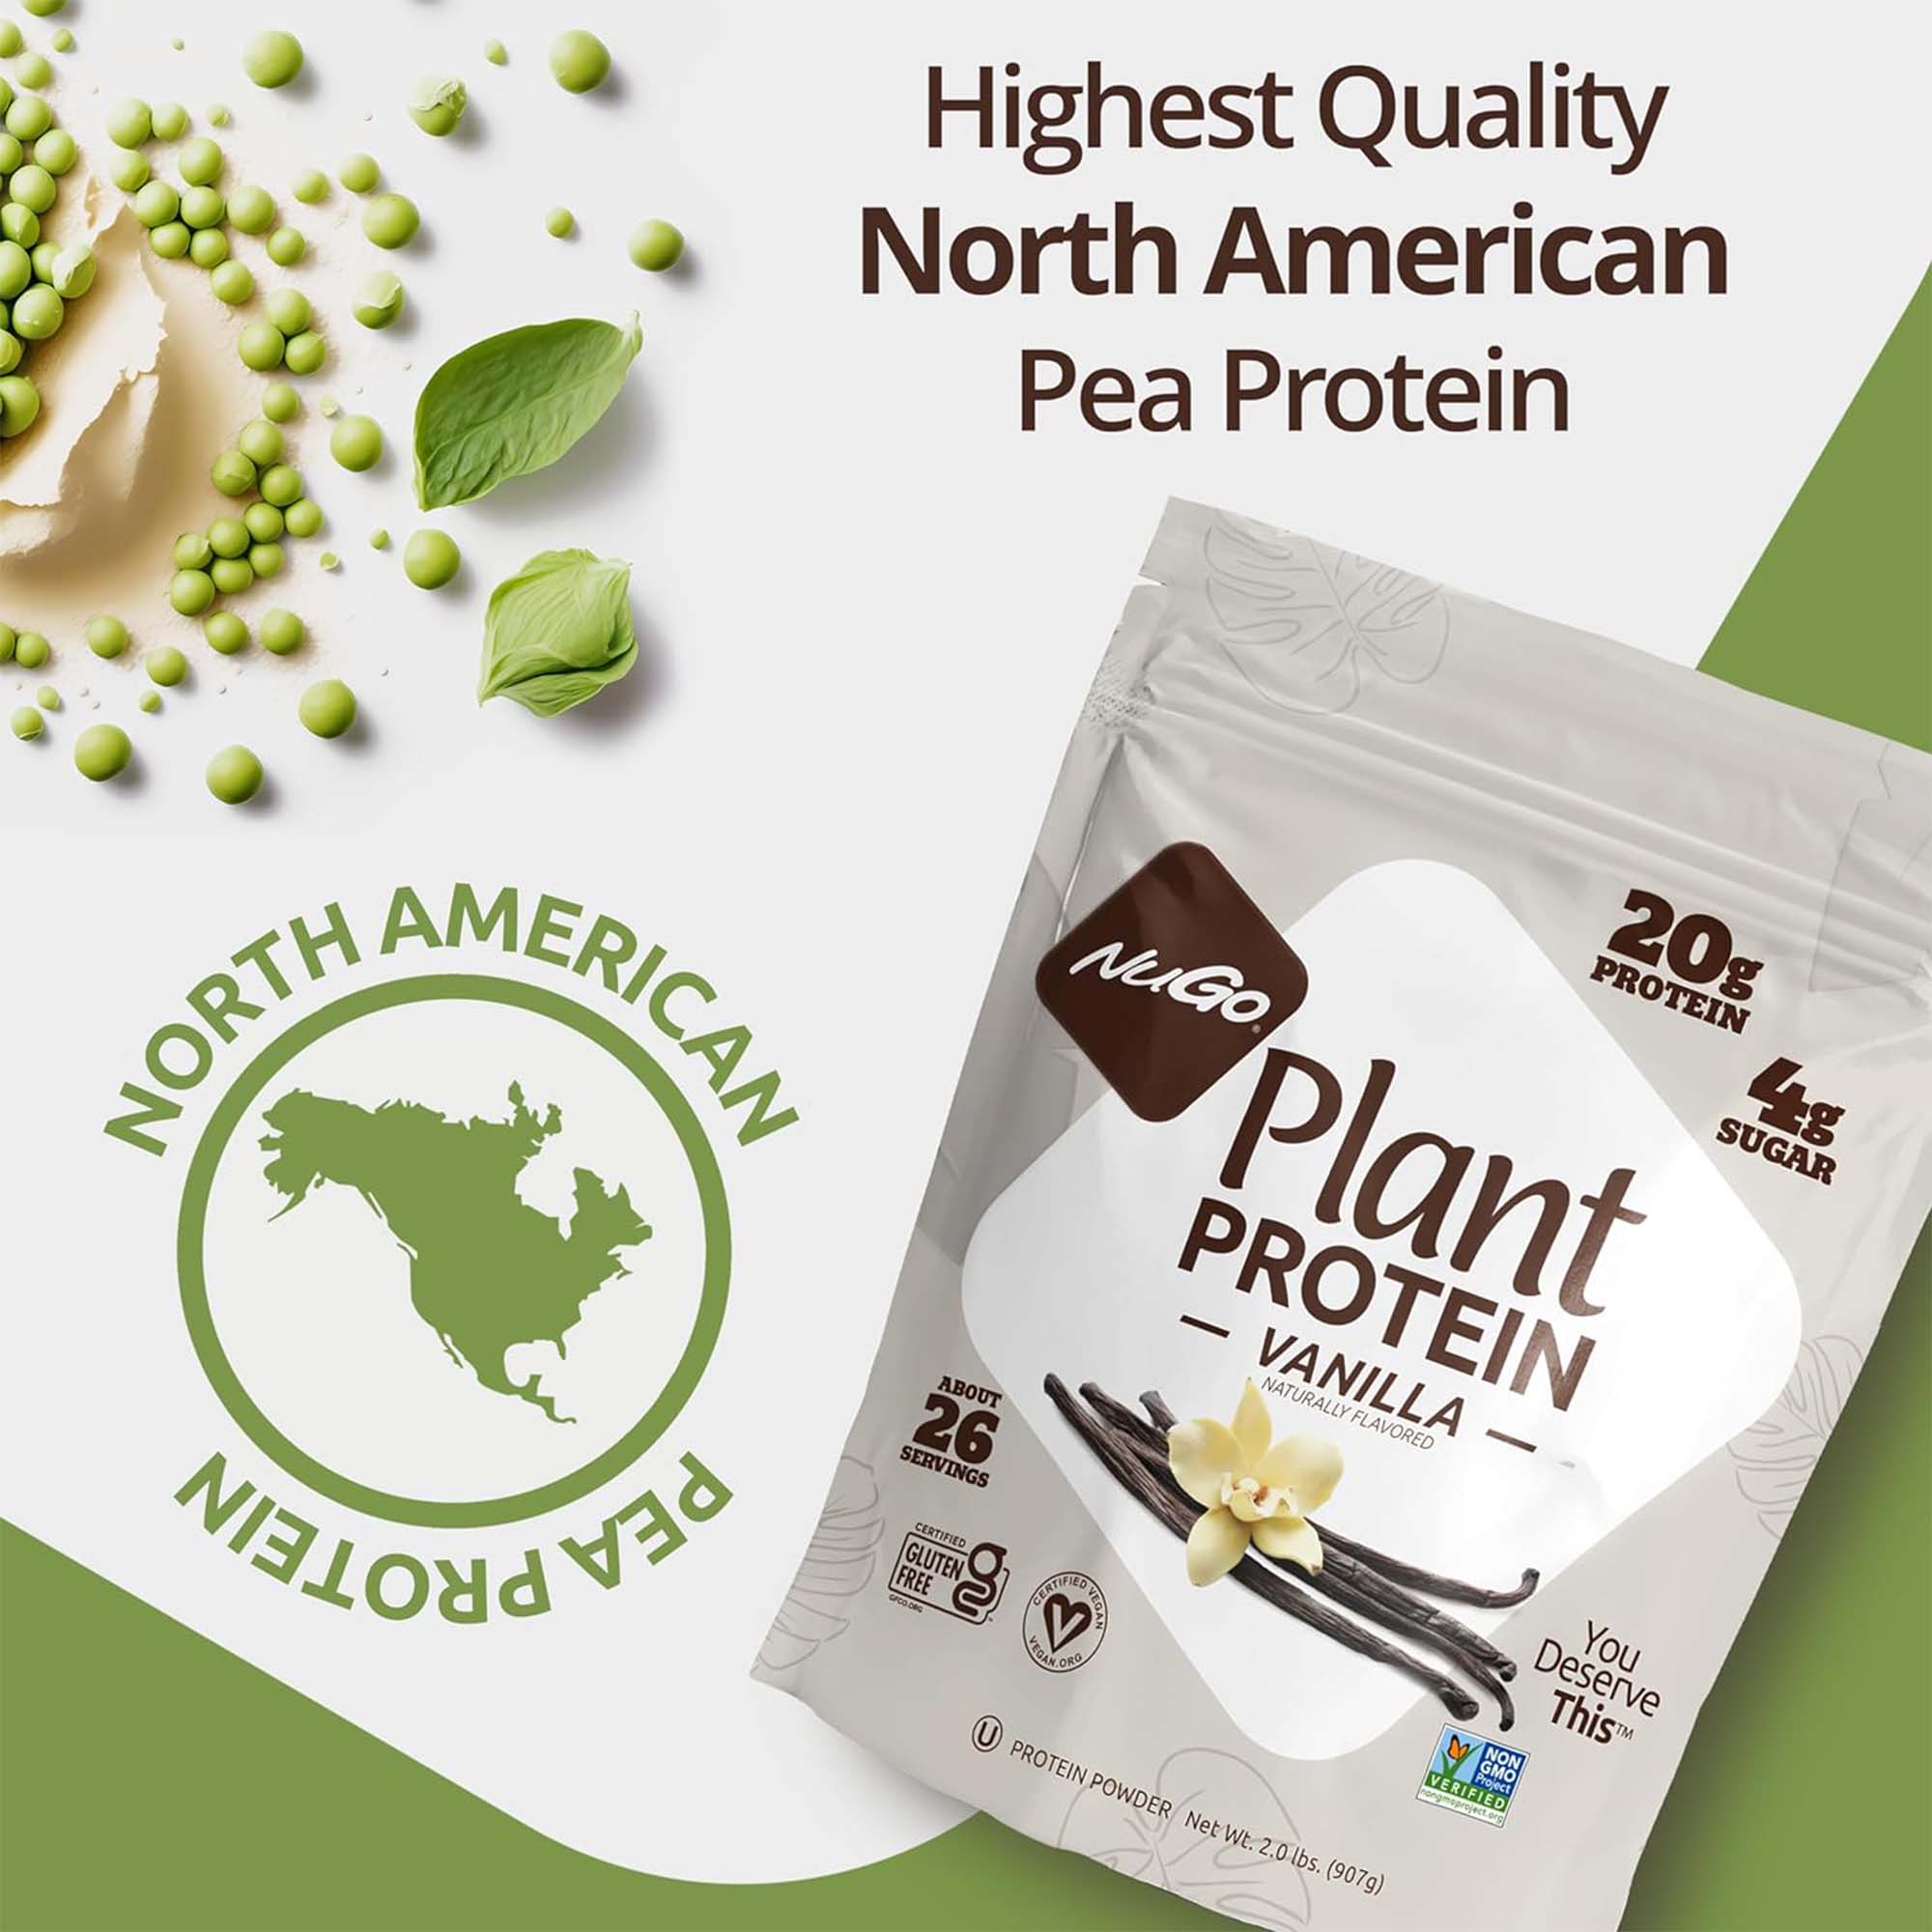 North American Pea Protein Text Image